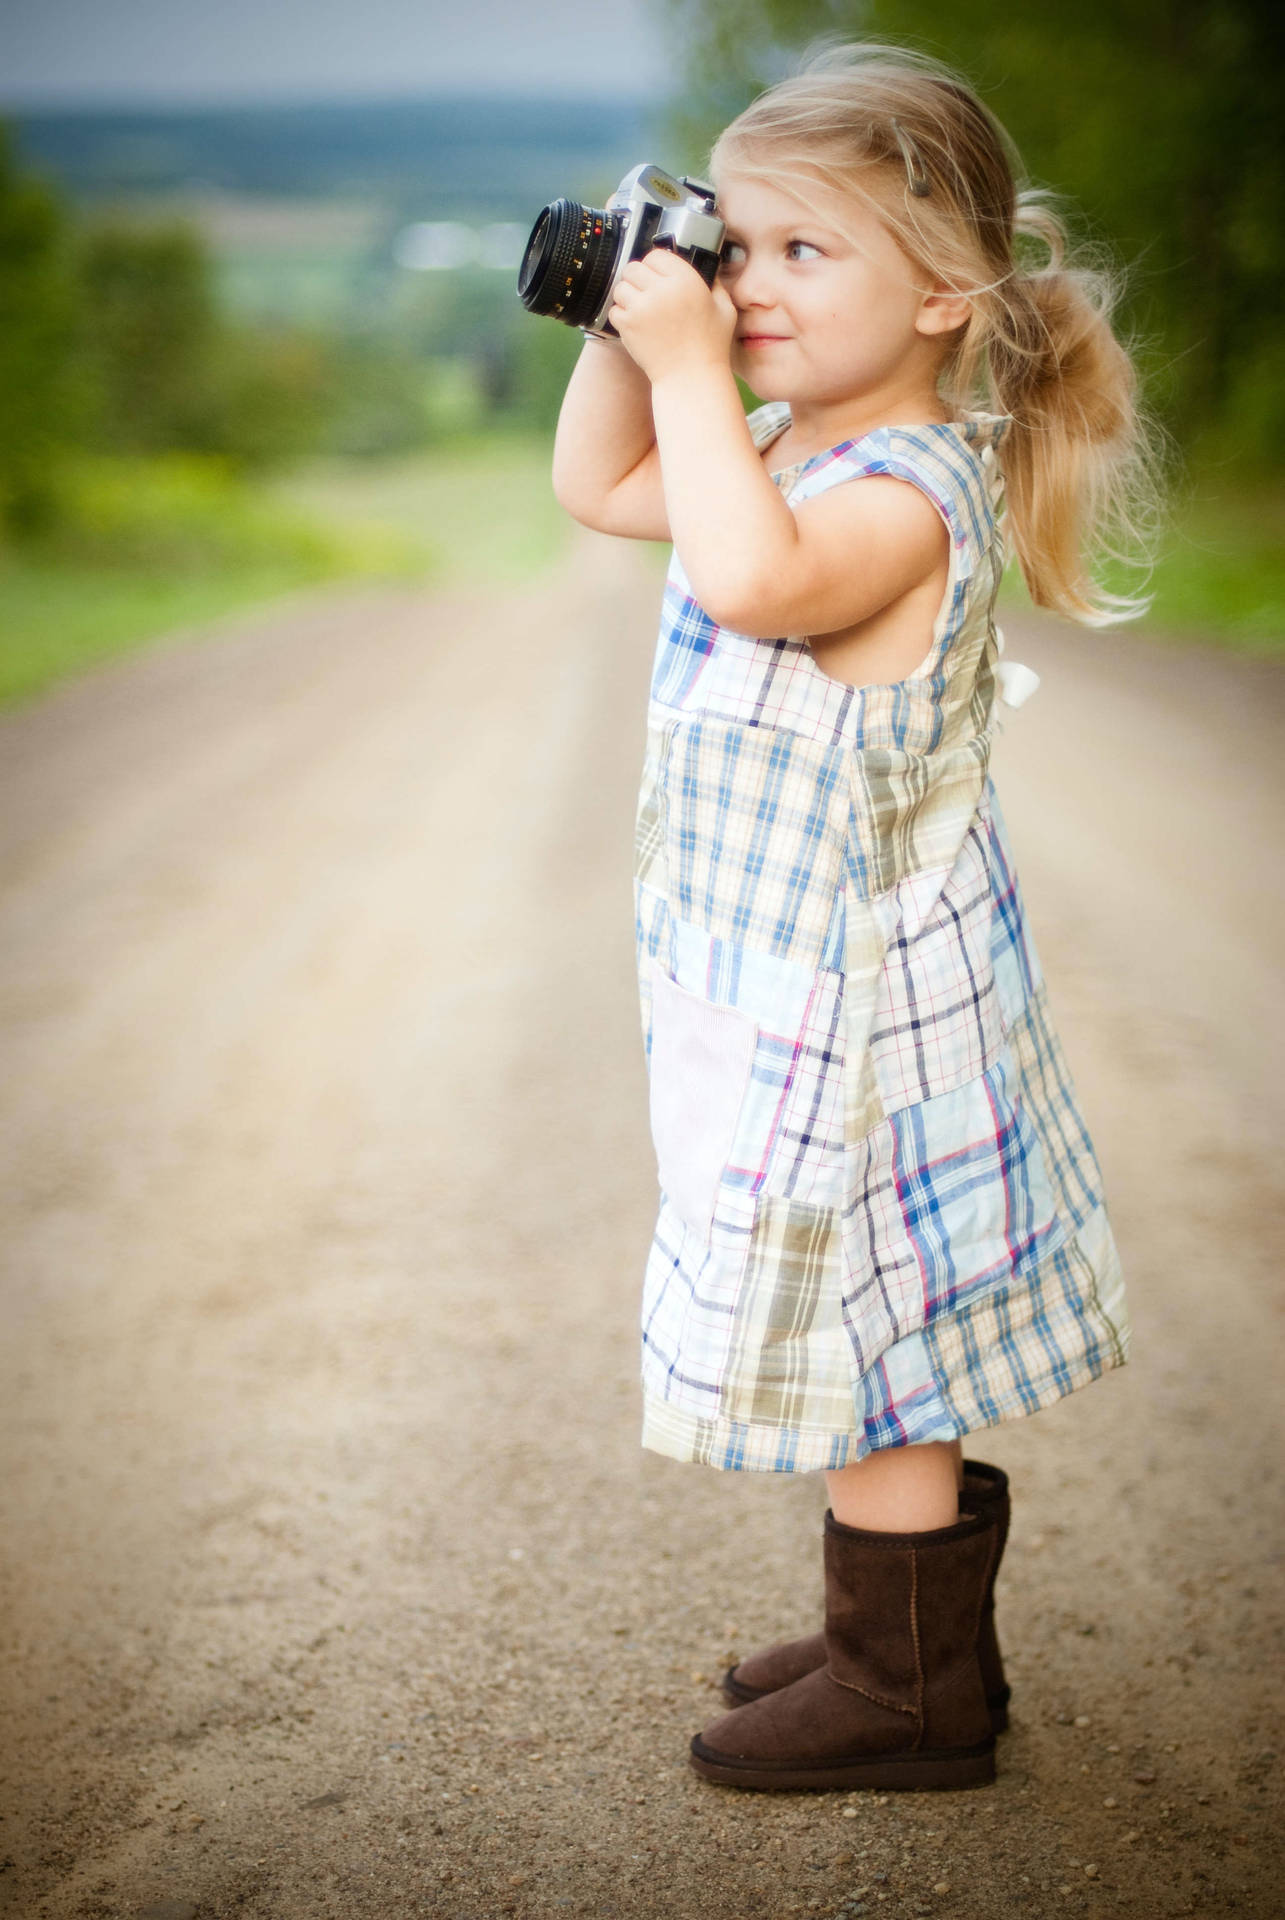 Cute Girl With Boots Taking Photos Background